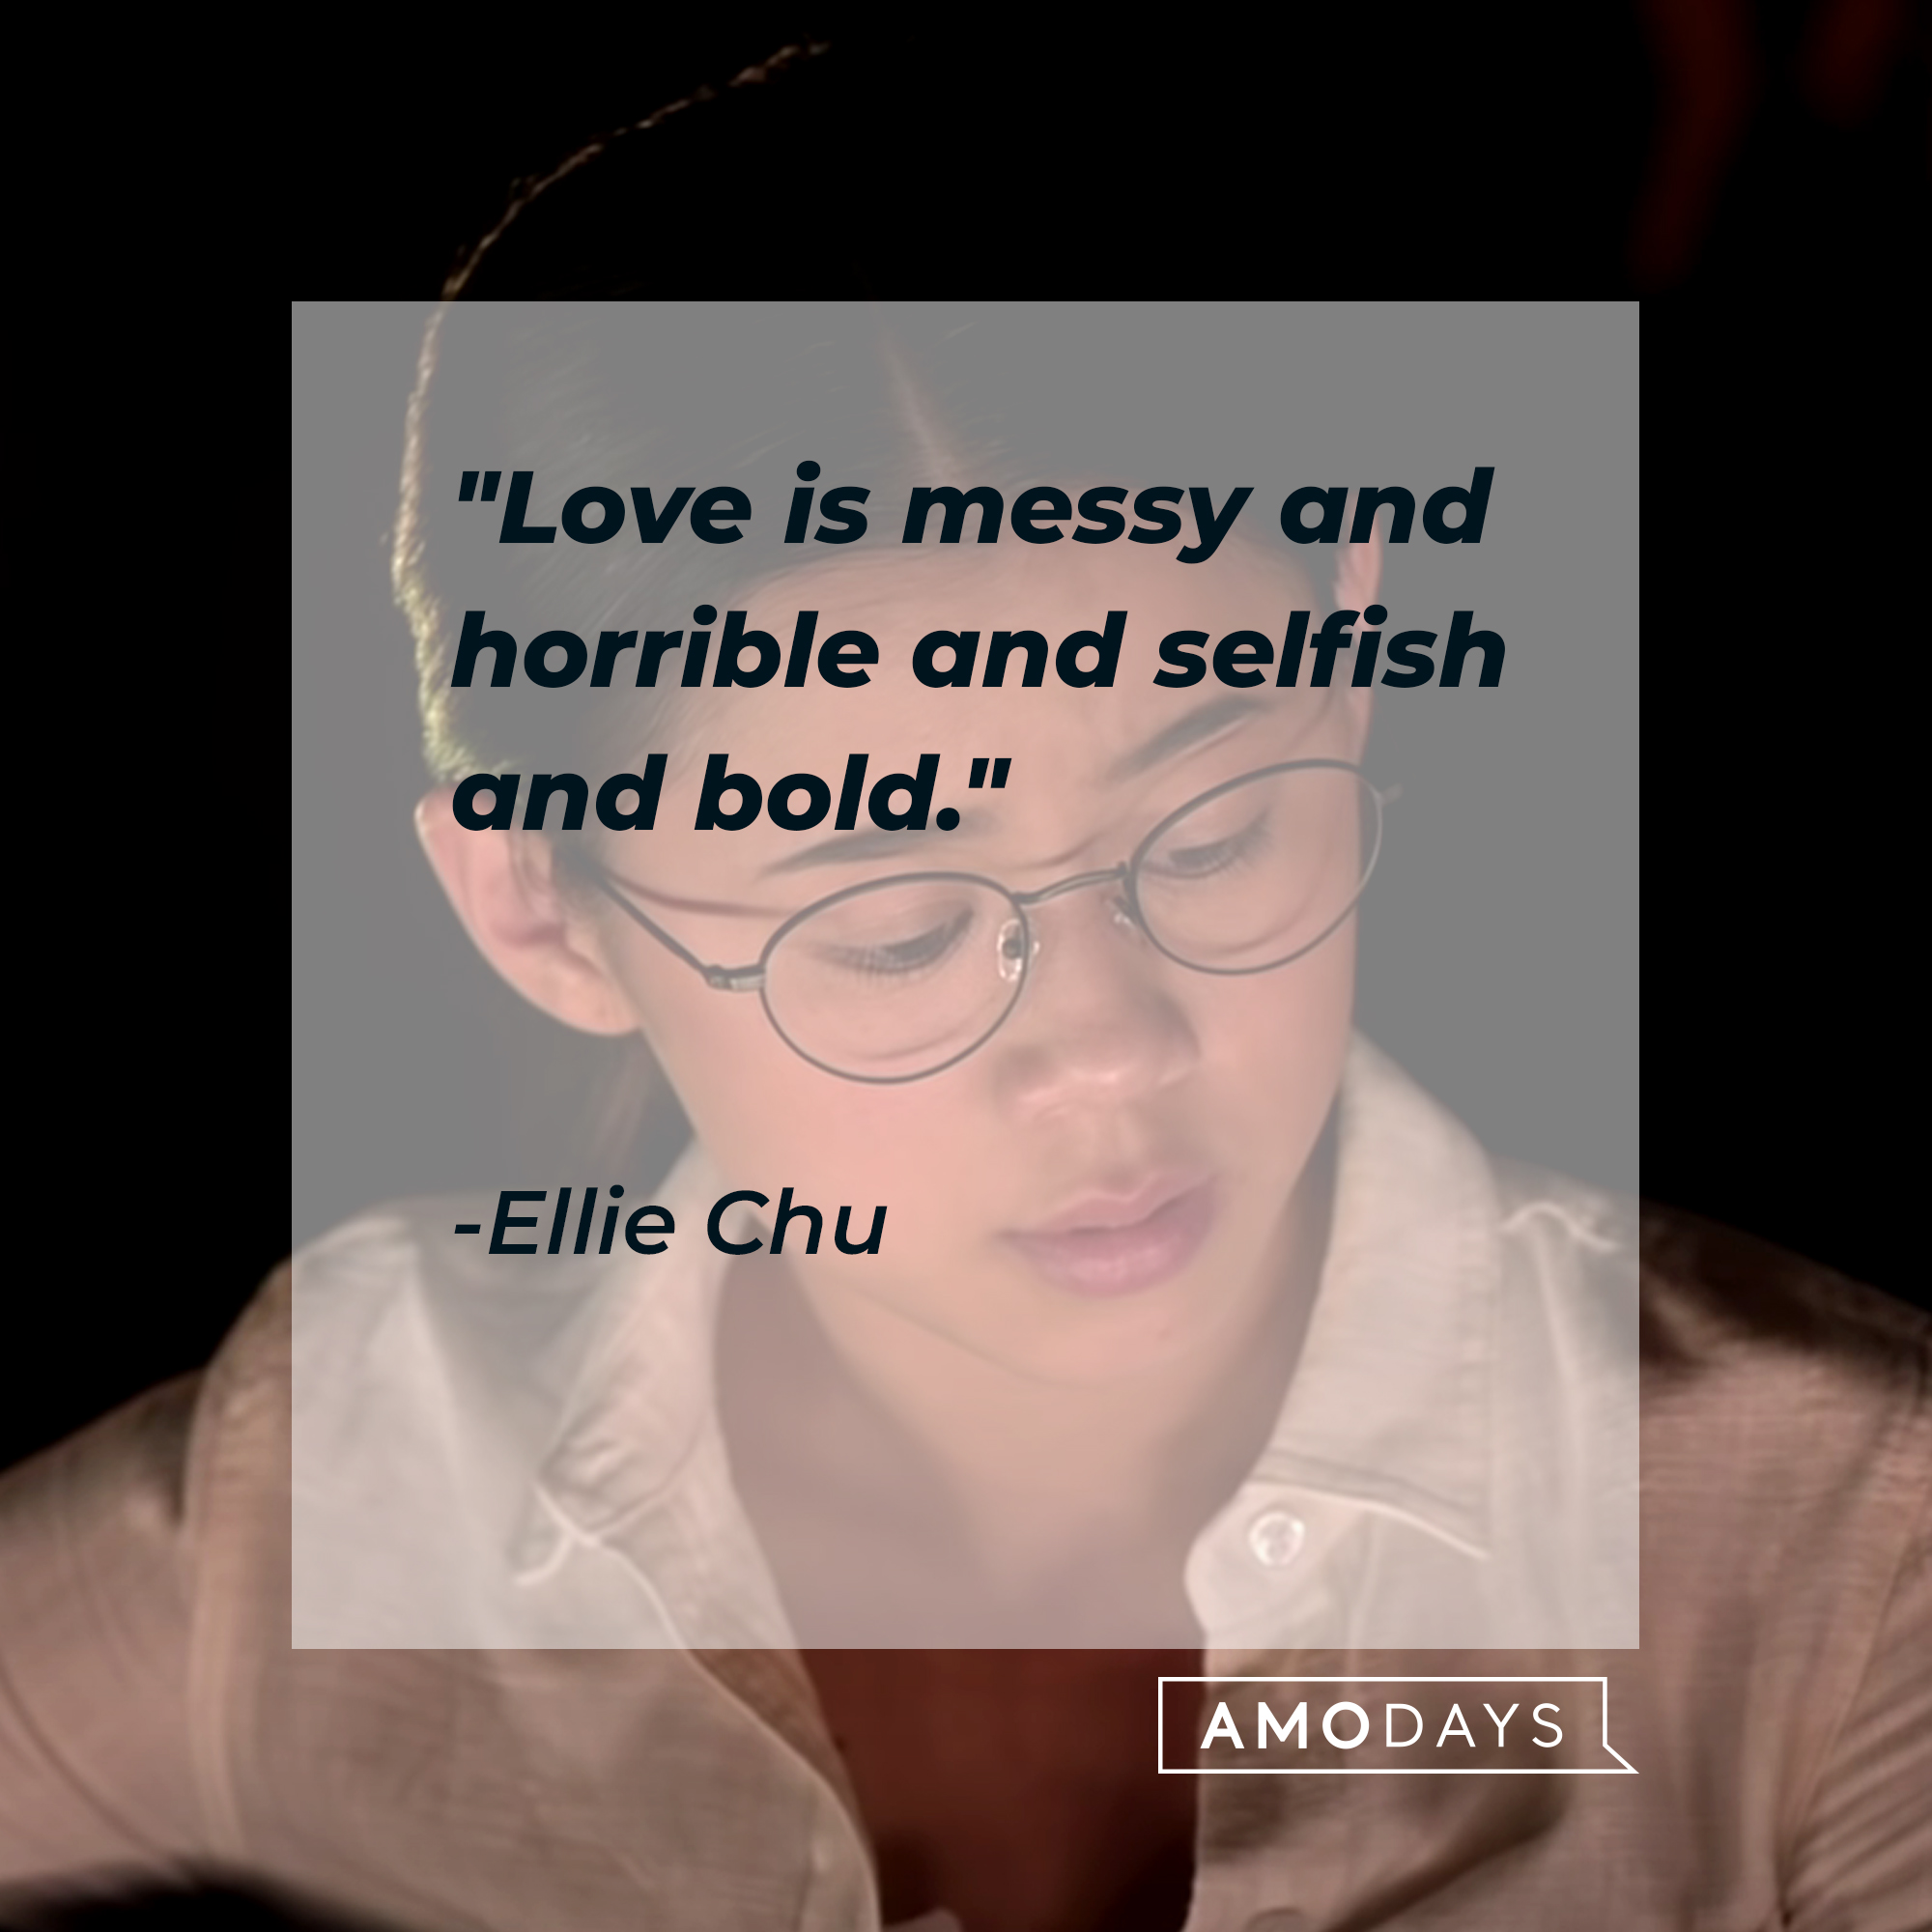 Ellie Chu's quote, "Love is messy and horrible and selfish and bold." | Image: youtube.com/Netflix